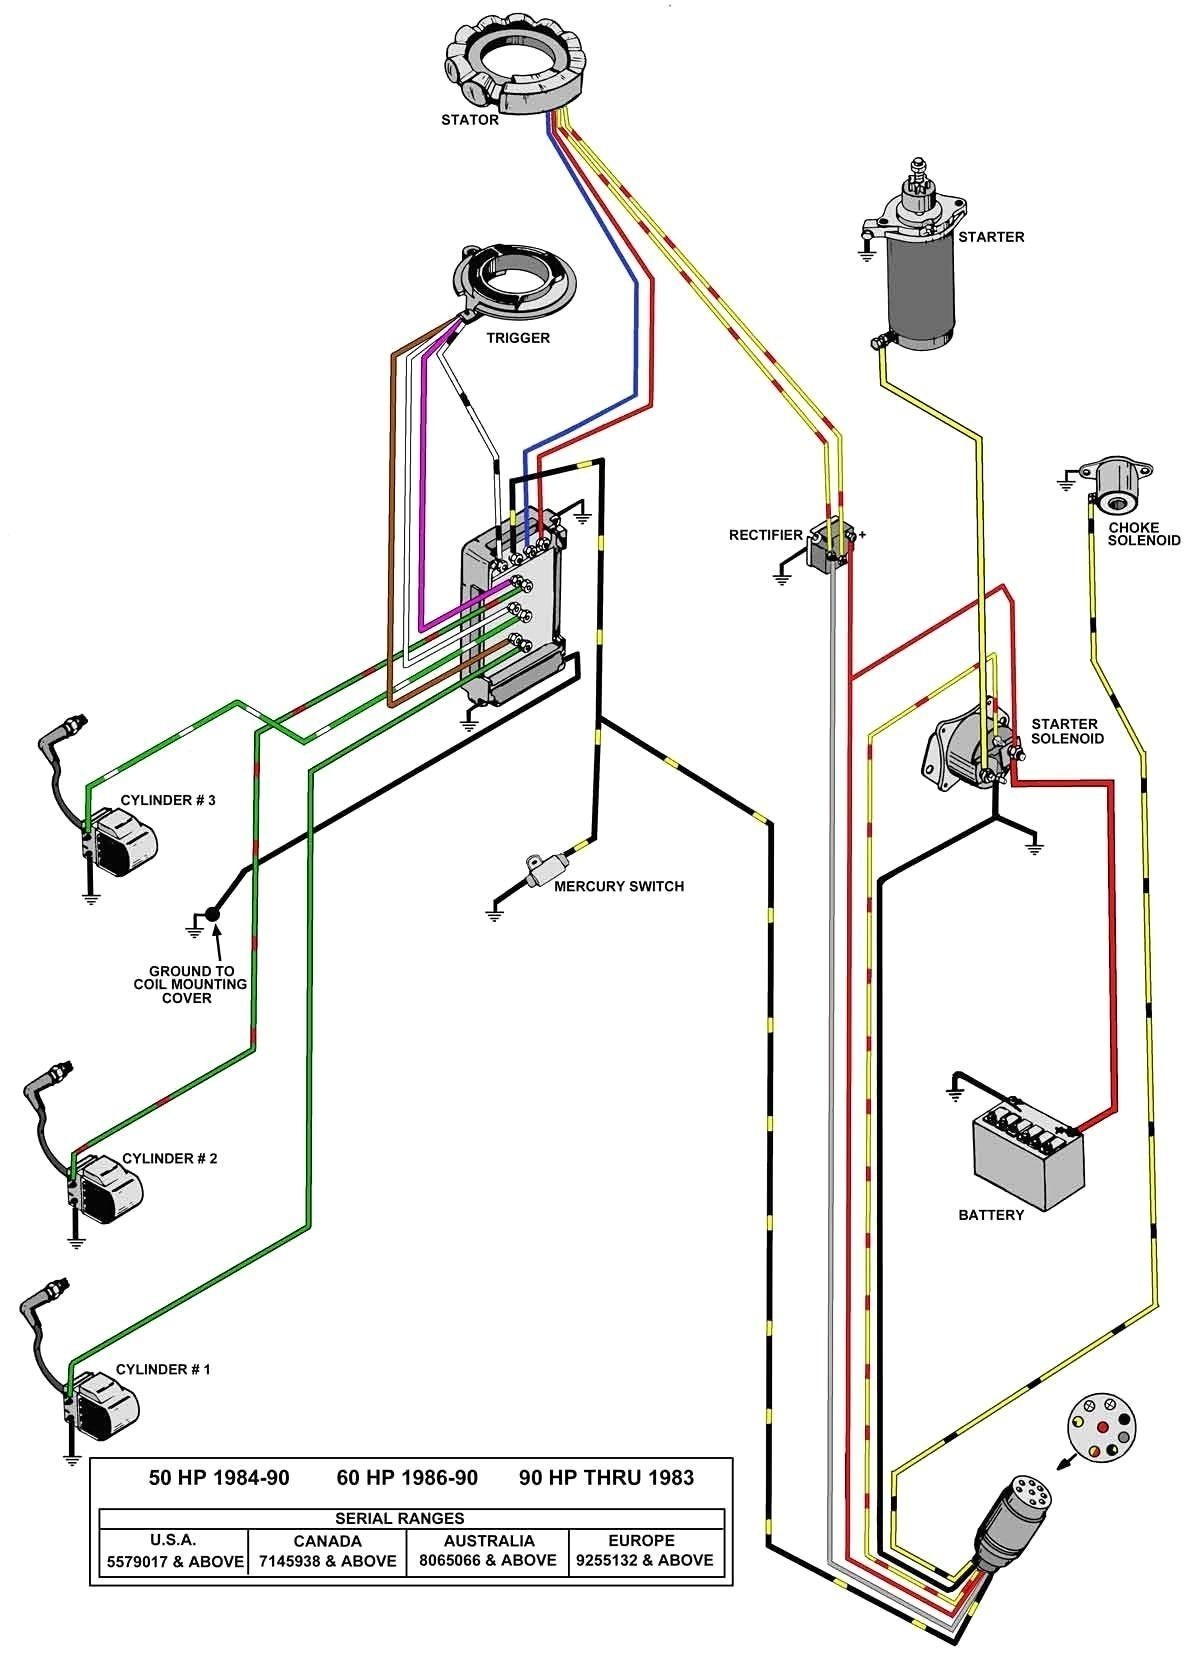 Wiring Diagram for Ignition Switch Mercury Outboard Fresh Wiring Diagram for Outboard Ignition Switch Refrence